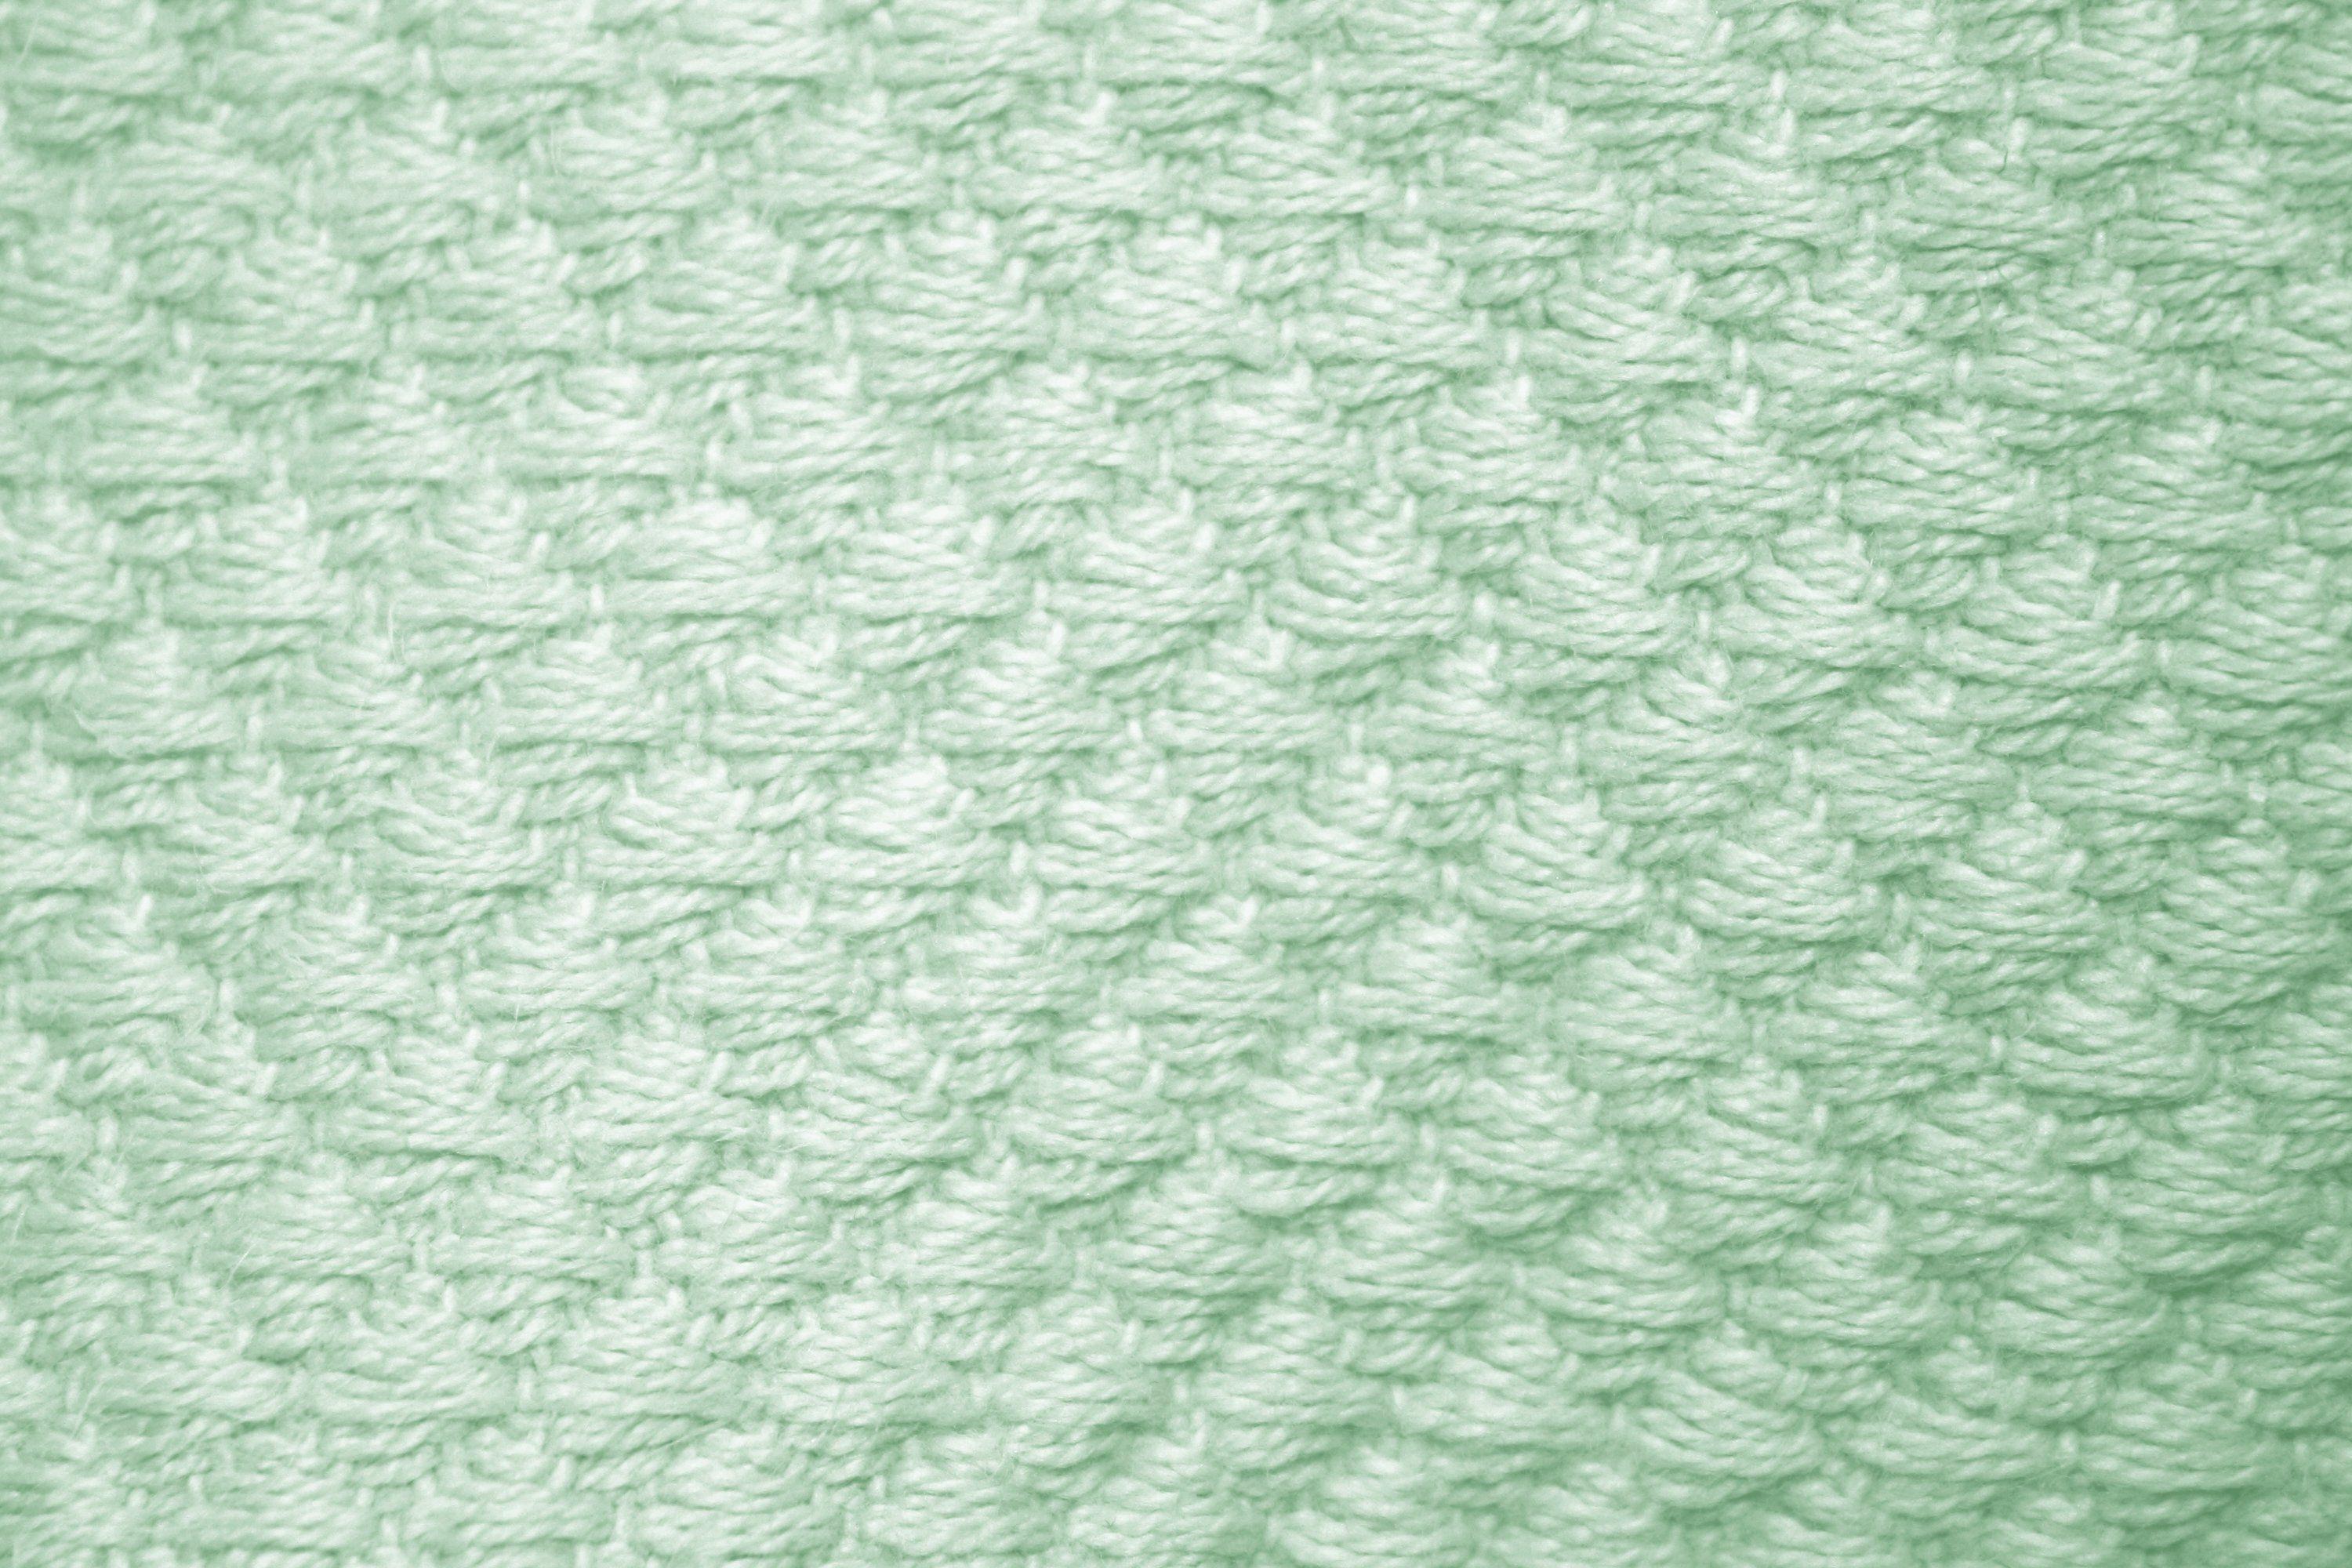 Green Diamond Patterned Blanket Close Up Texture Picture. Free